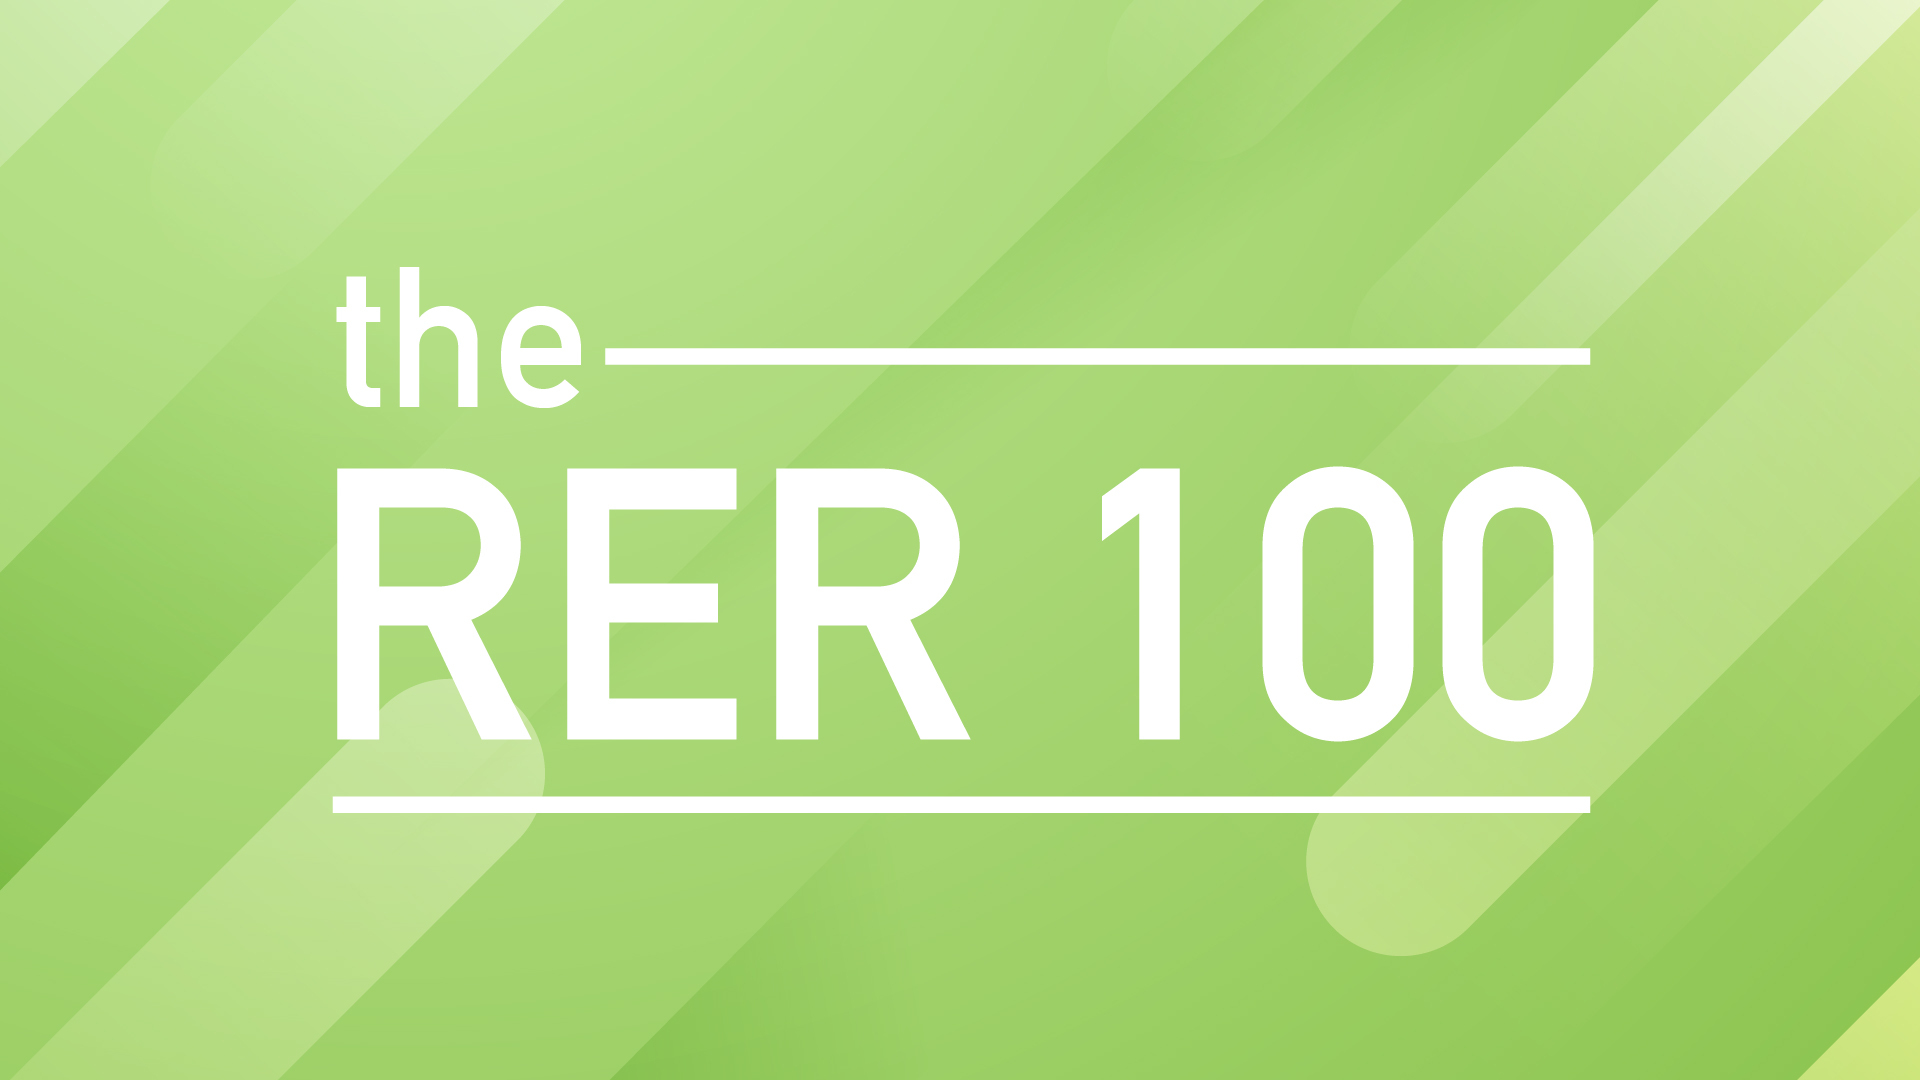 The RER 100 graphic